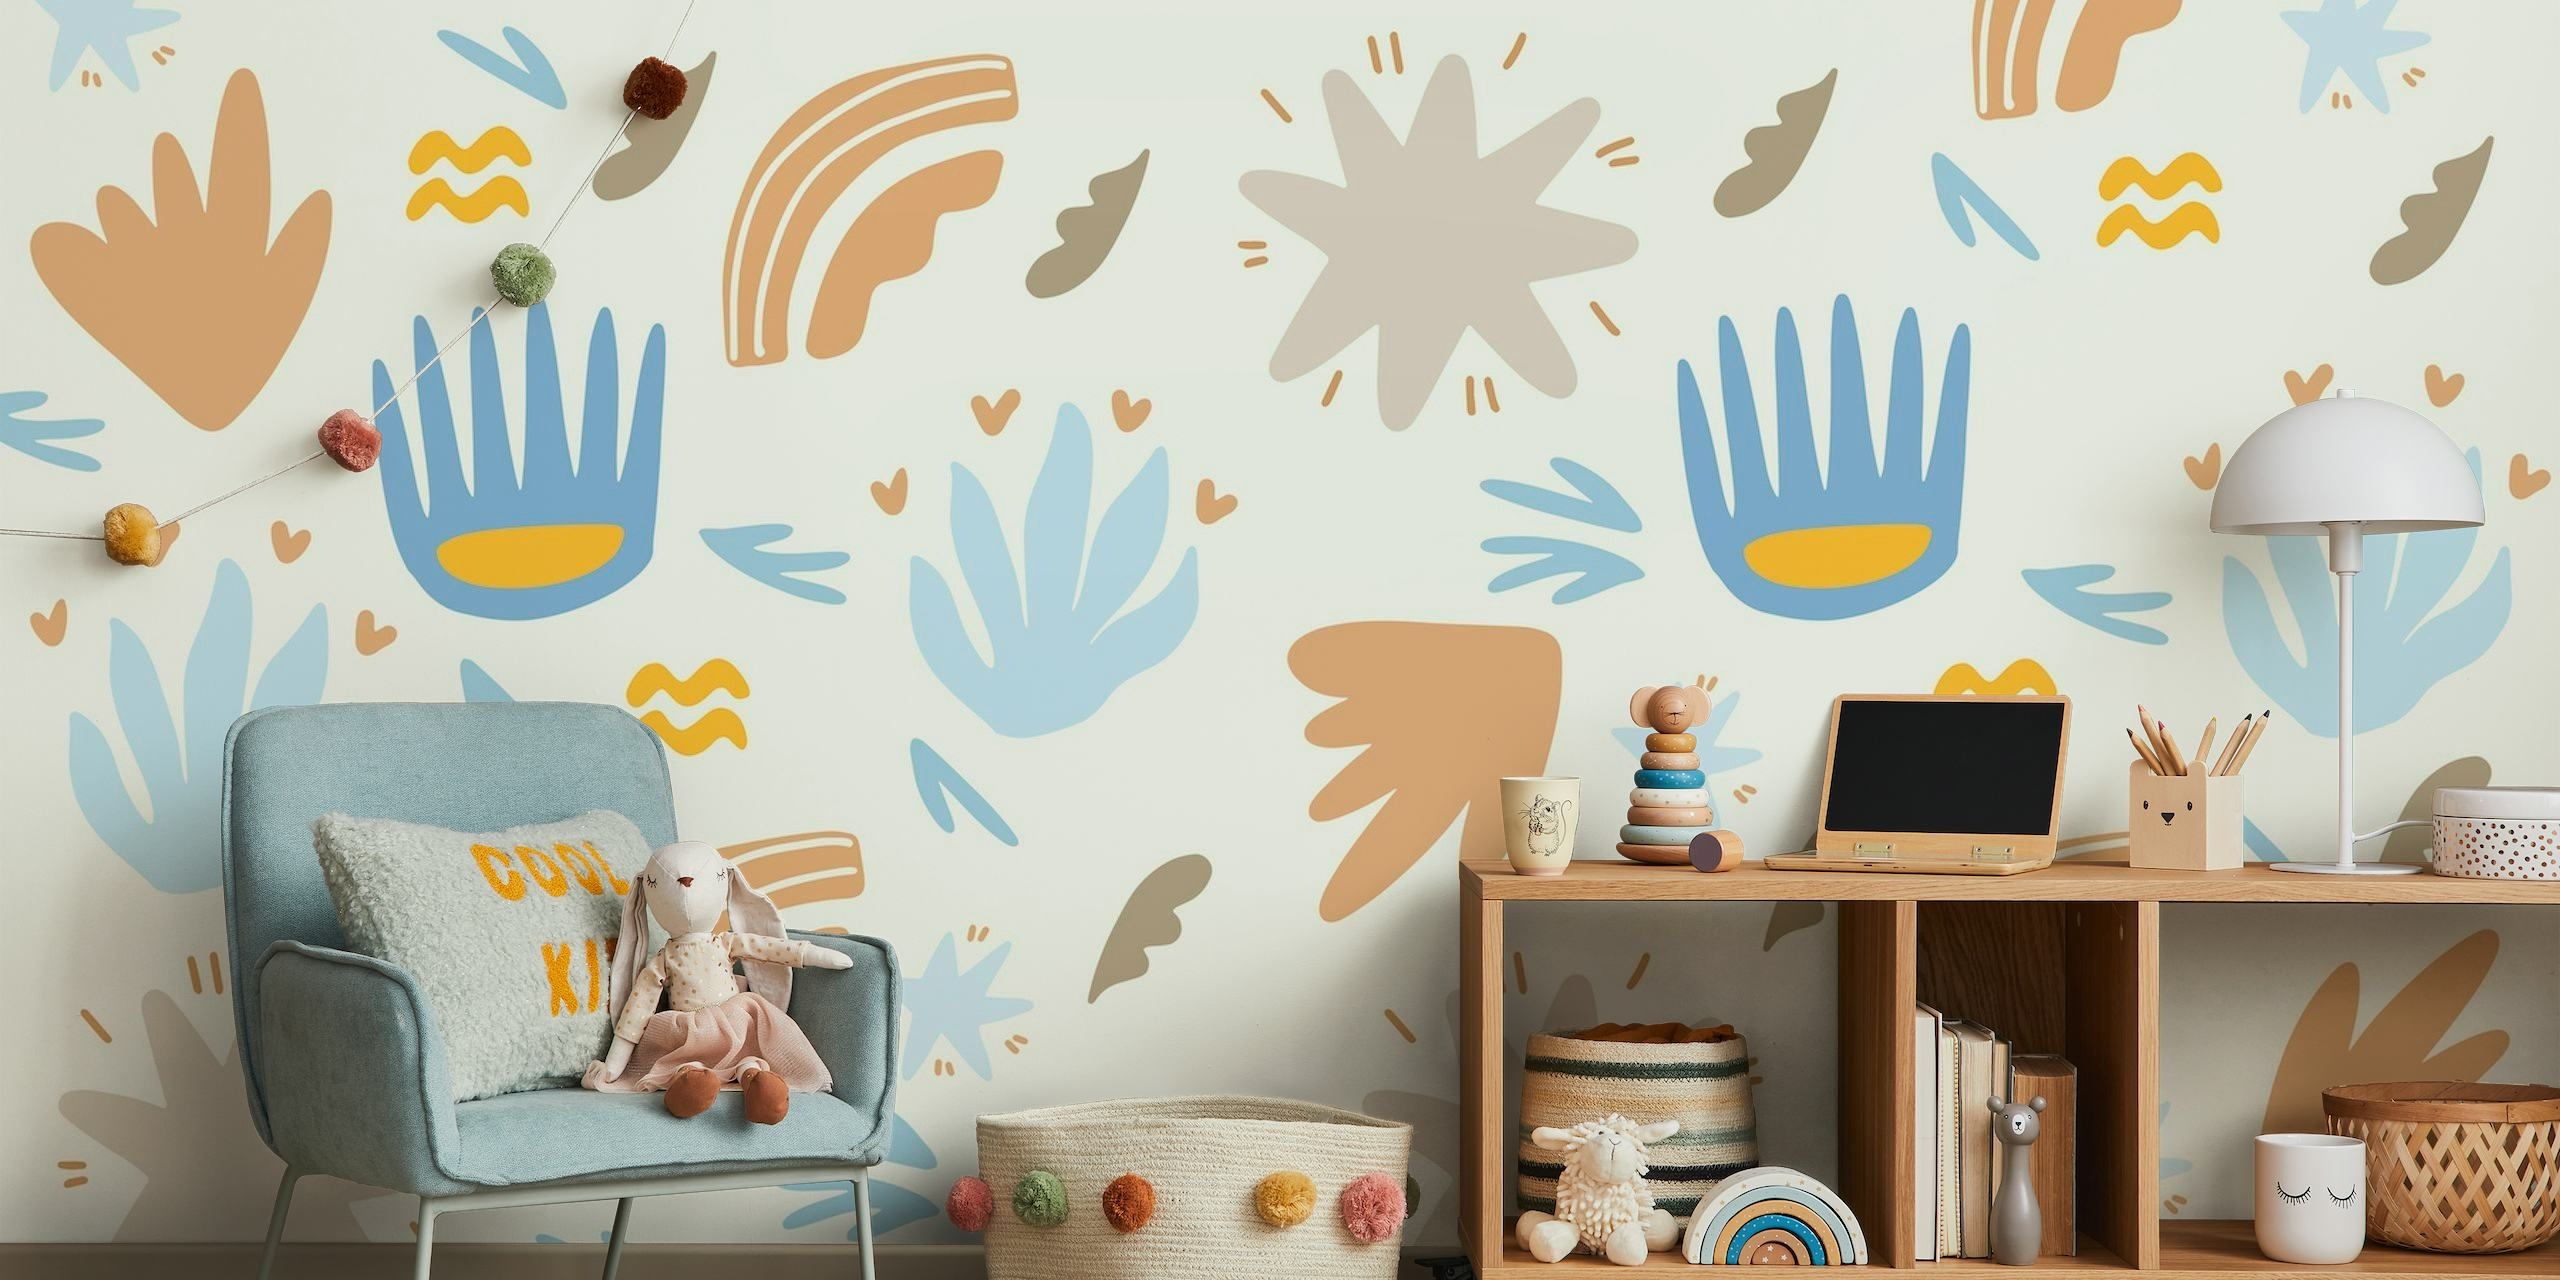 Children's summer-themed wall mural with abstract shapes and whimsical motifs in blue, ochre, and terra cotta